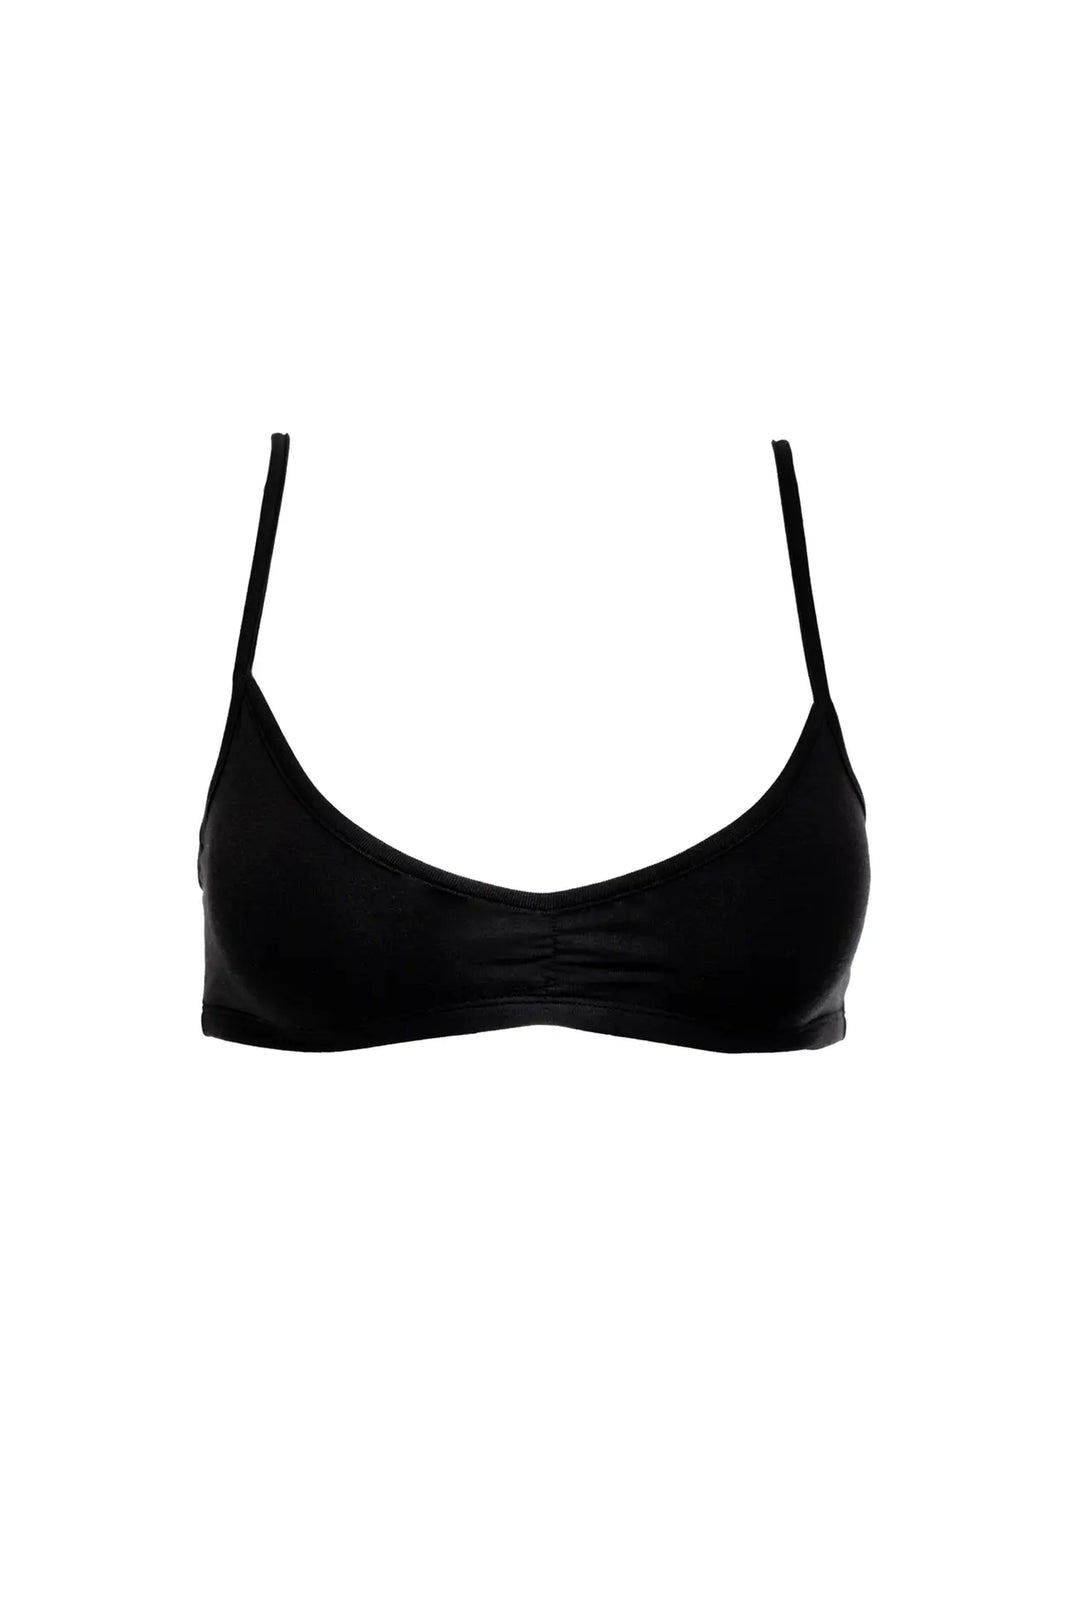 Black bralette made in Canada with ruched detailing